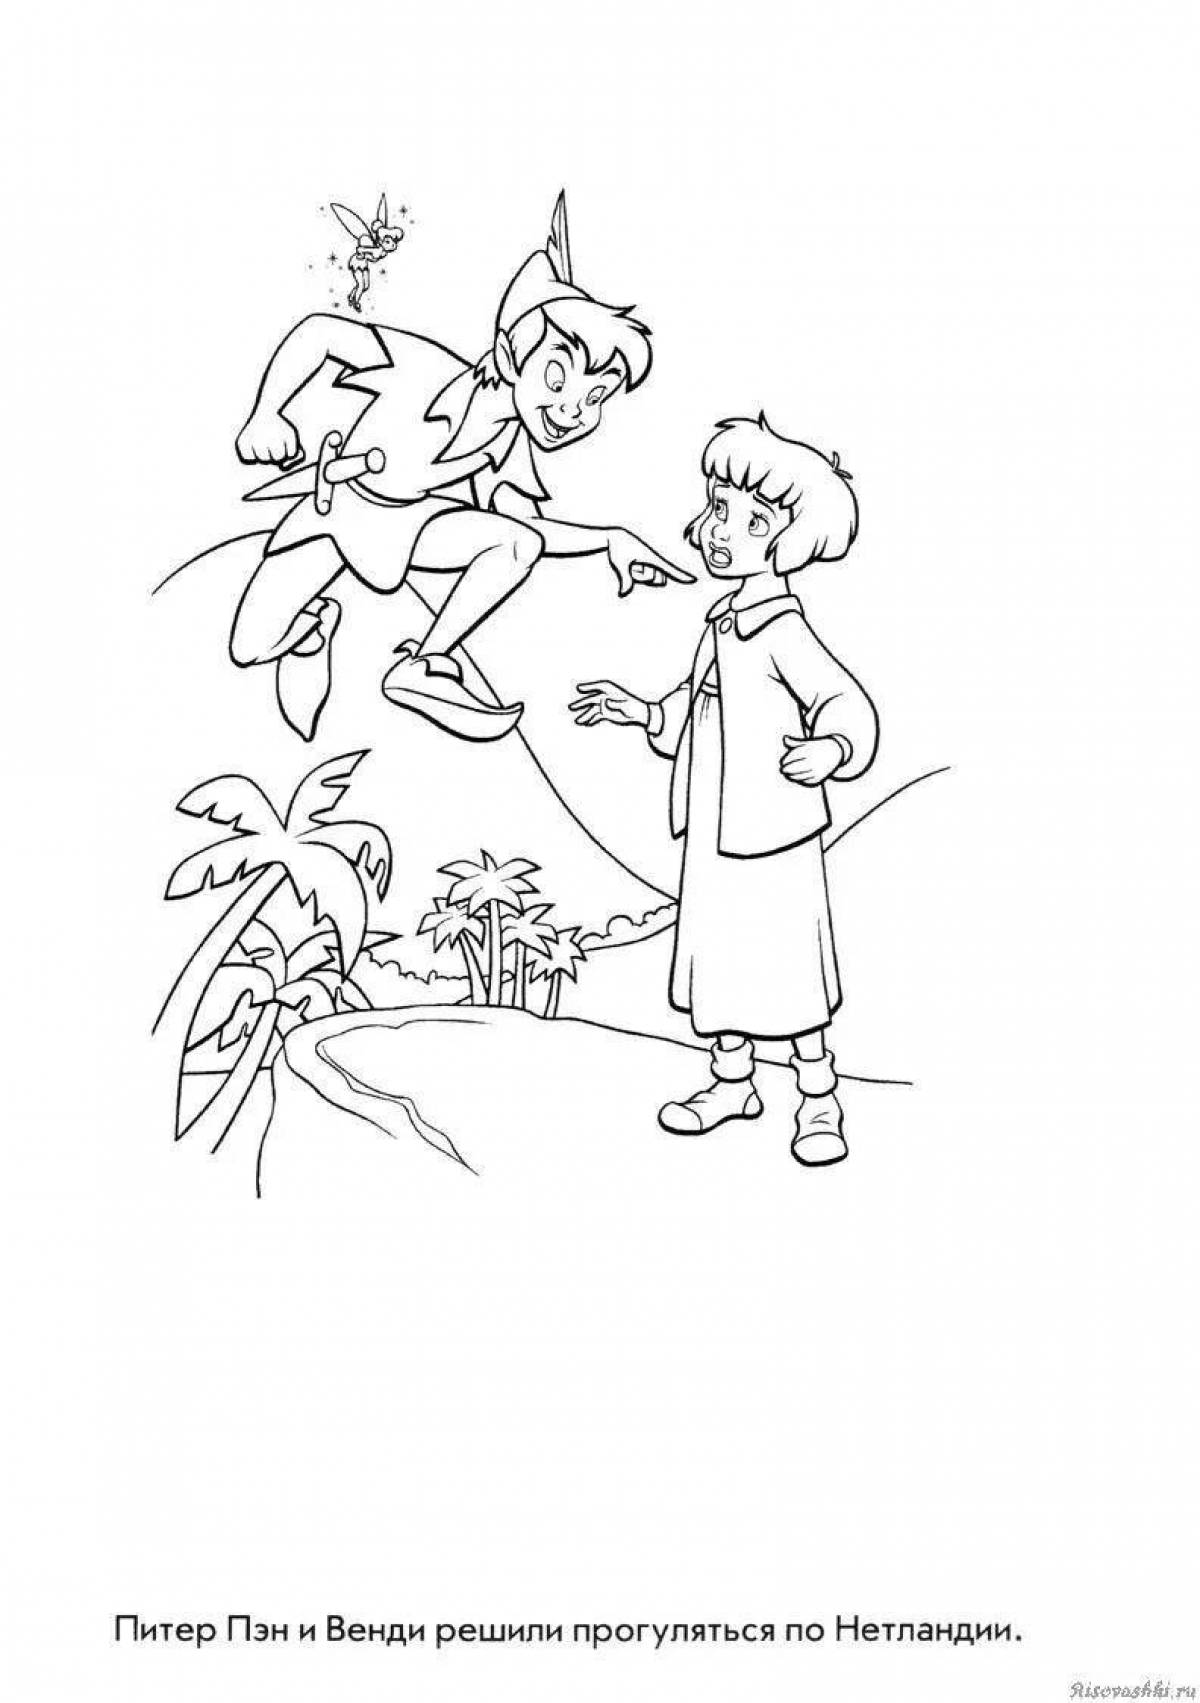 Coloring page of wasted time - no reward